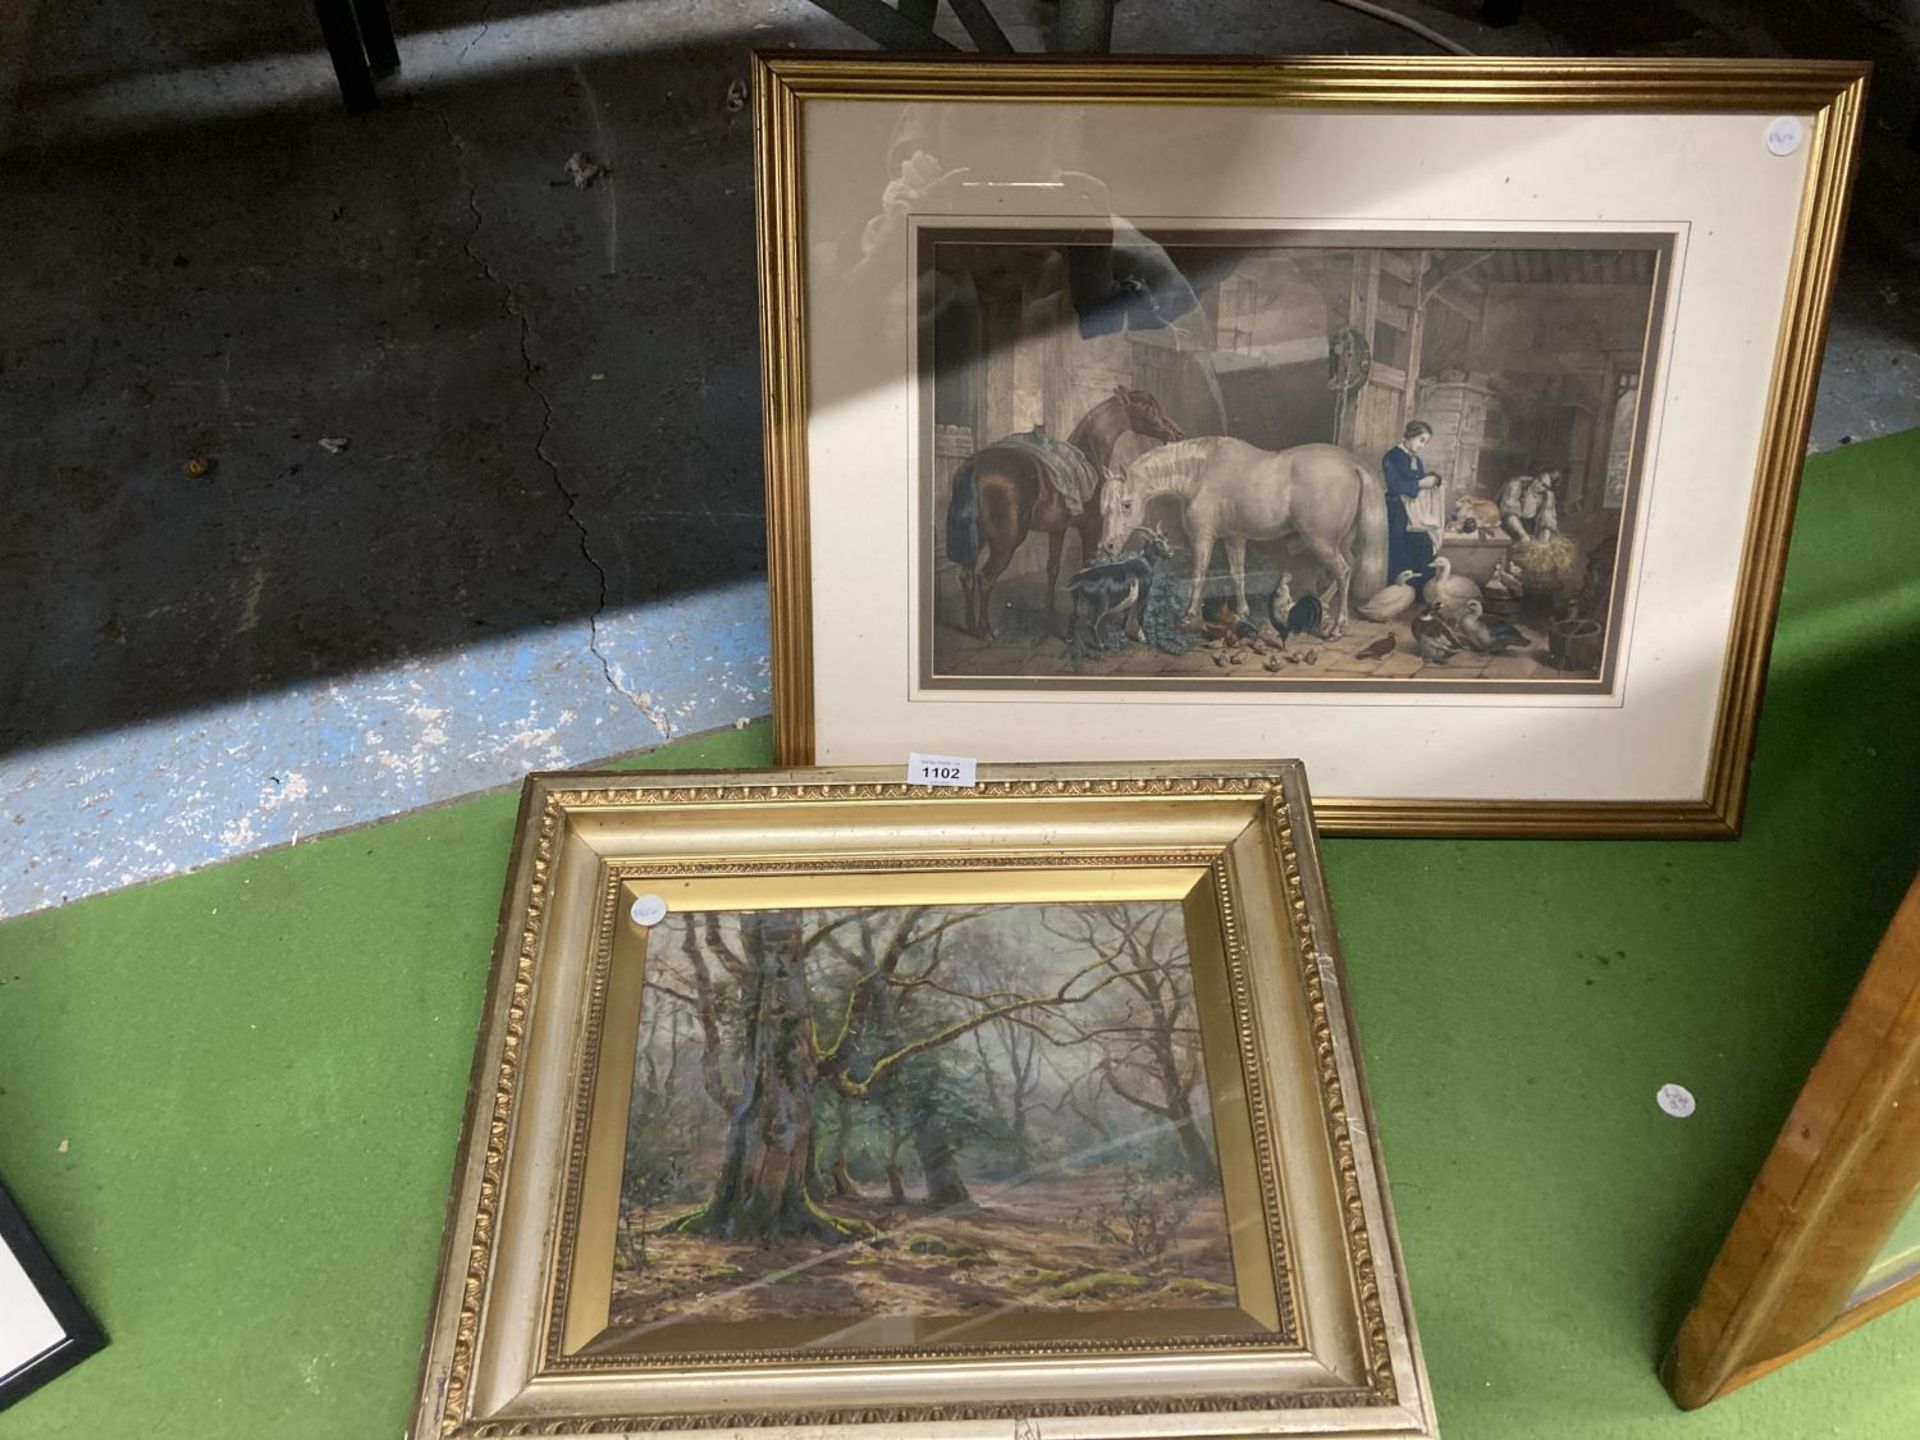 TWO FRAMED PRINTS, ONE OF A FOREST SCENE AND THE OTHER A FARMYARD SCENE